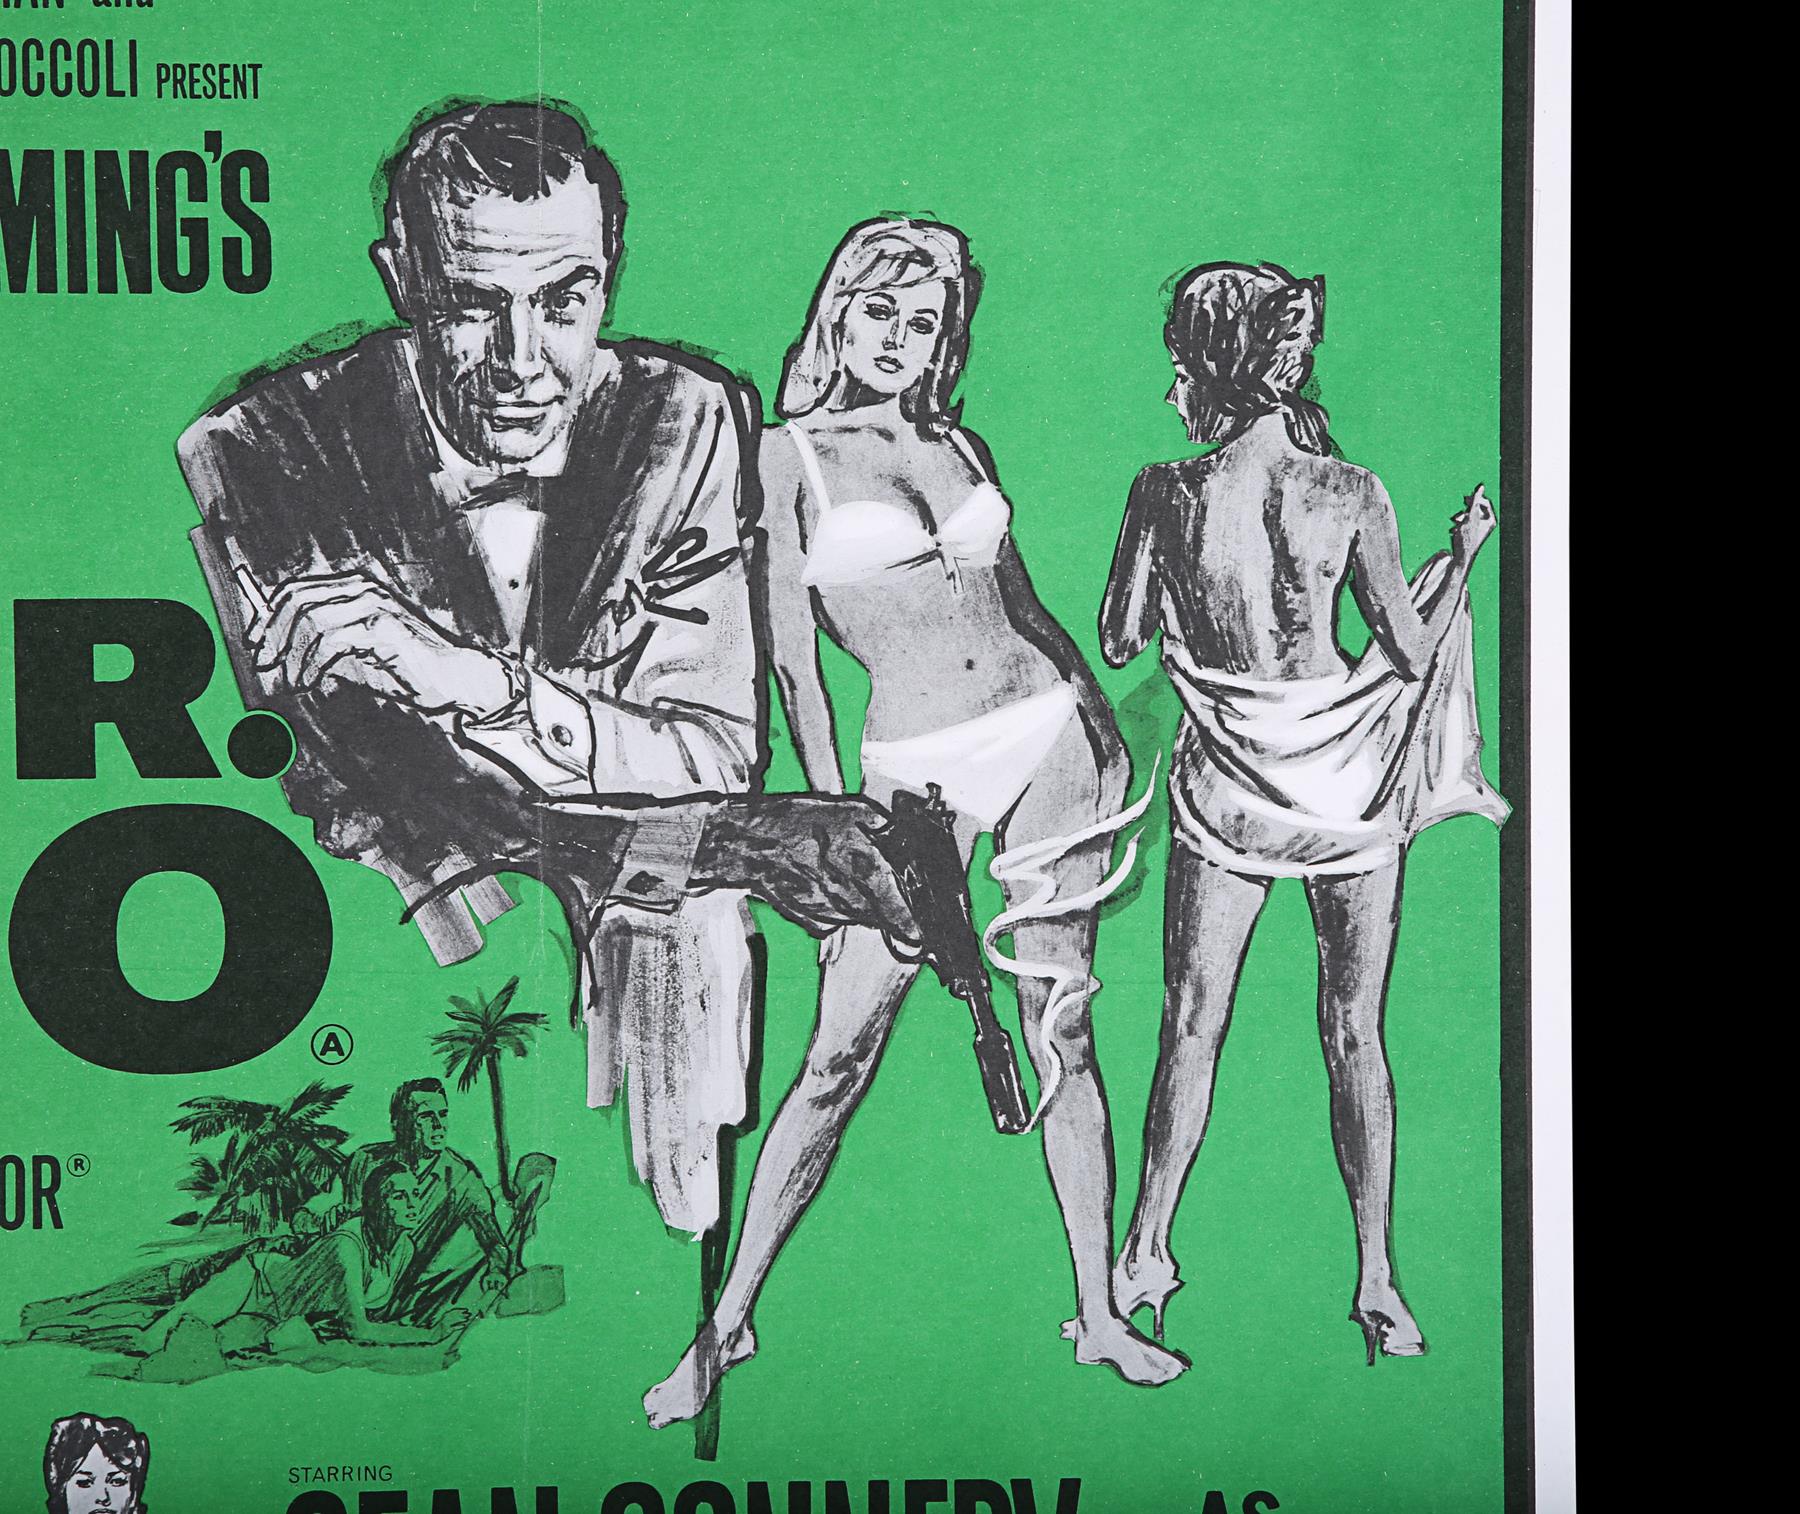 DR. NO (1962) - UK Quad Double-Crown Poster, 1968 Re-Release - Image 2 of 6